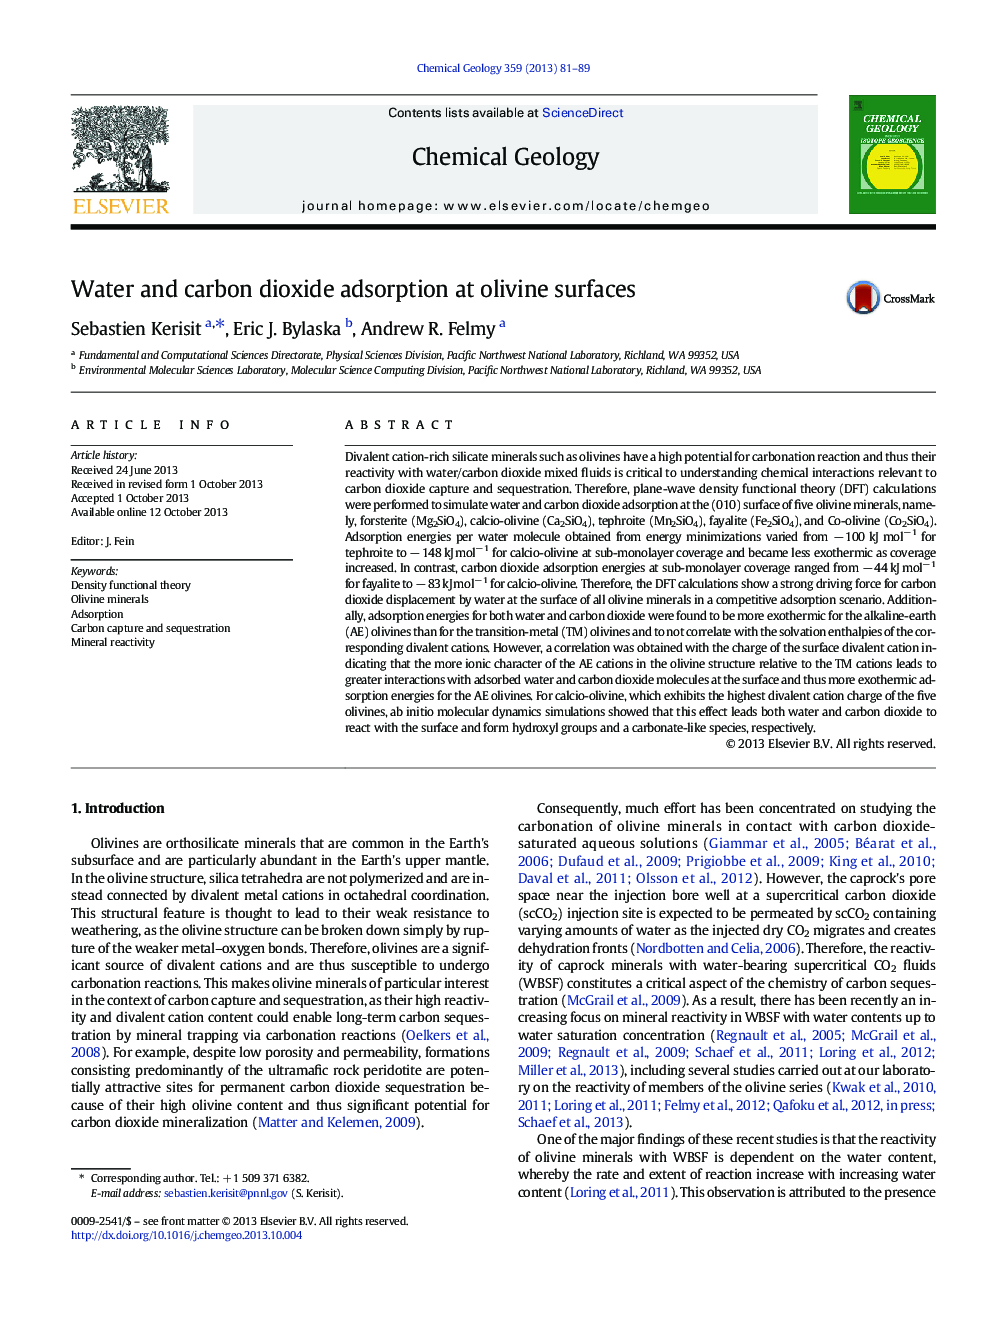 Water and carbon dioxide adsorption at olivine surfaces